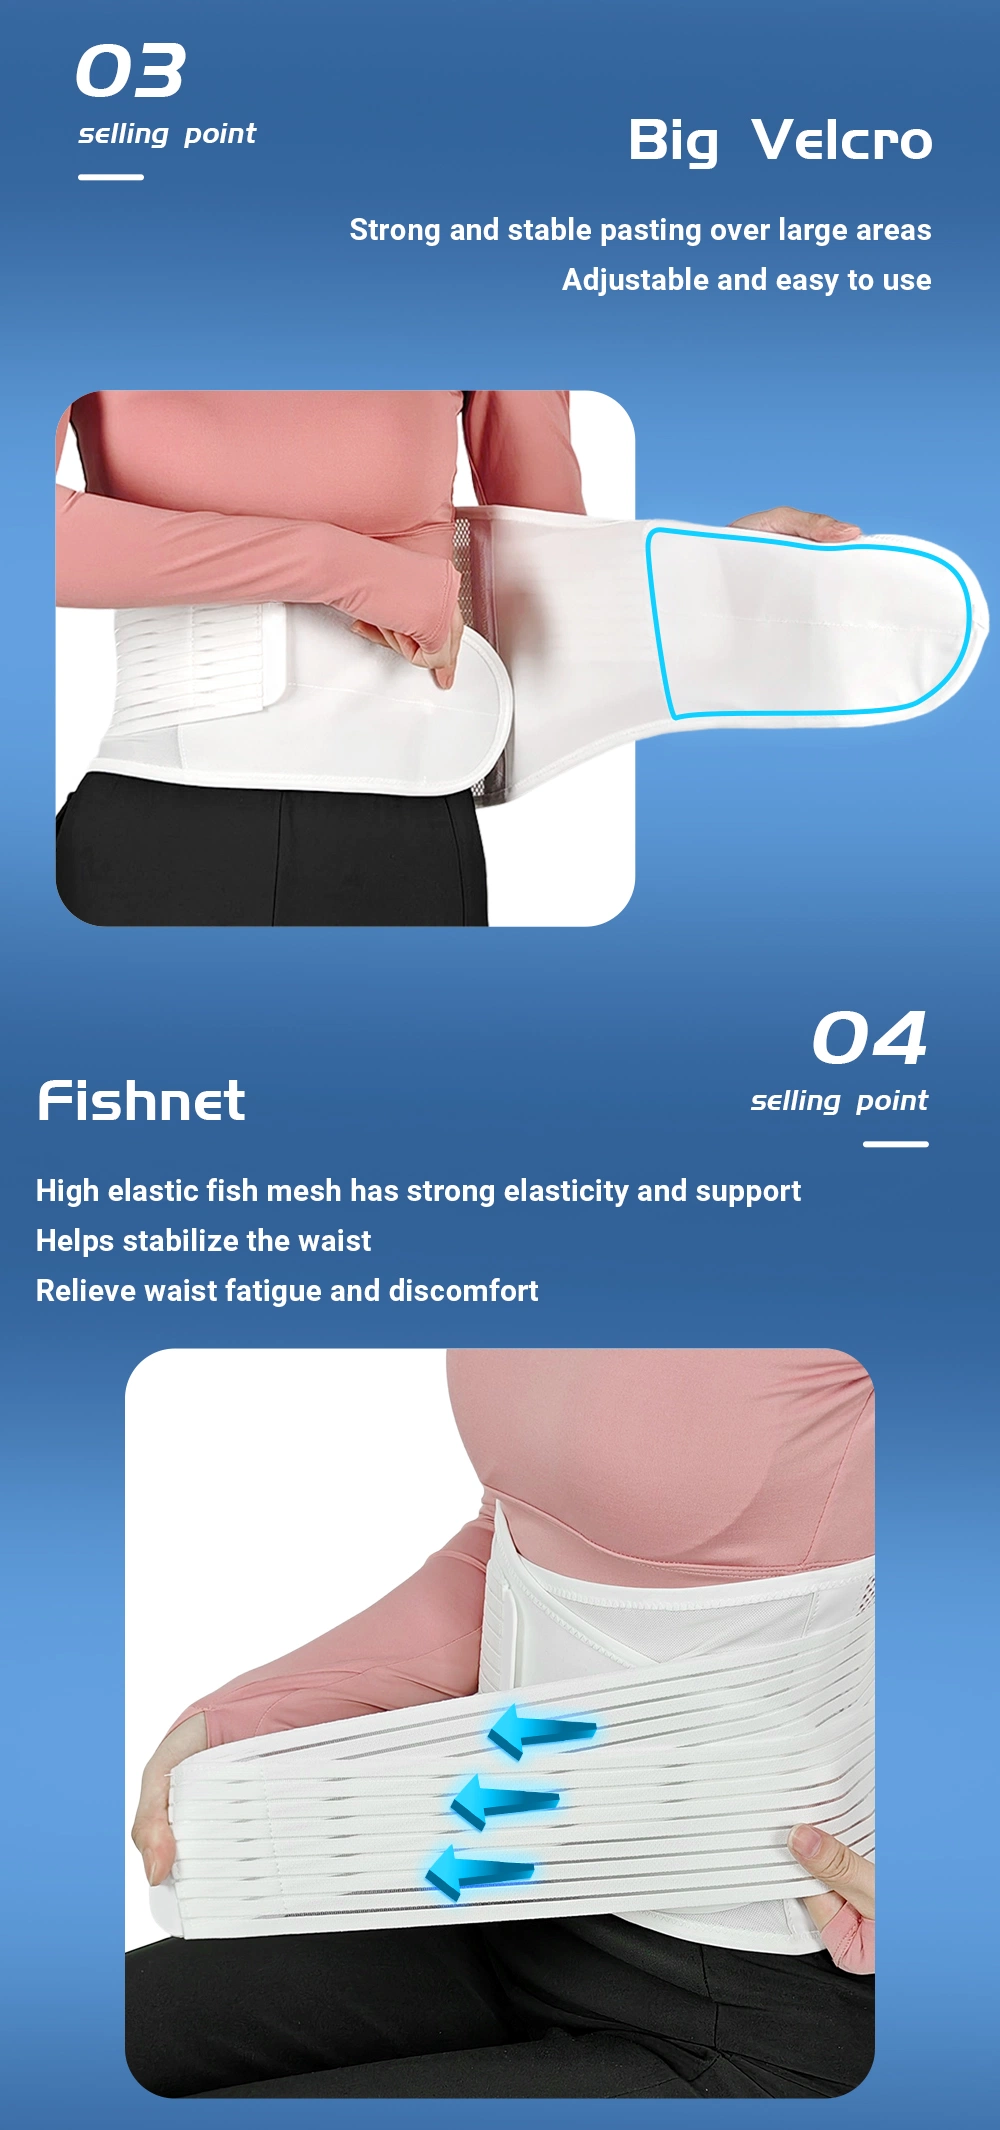 Professional Protect Medical Working Safety Double Pull Breathable Waist Support Brace Back Pad Lumbar Back Belt